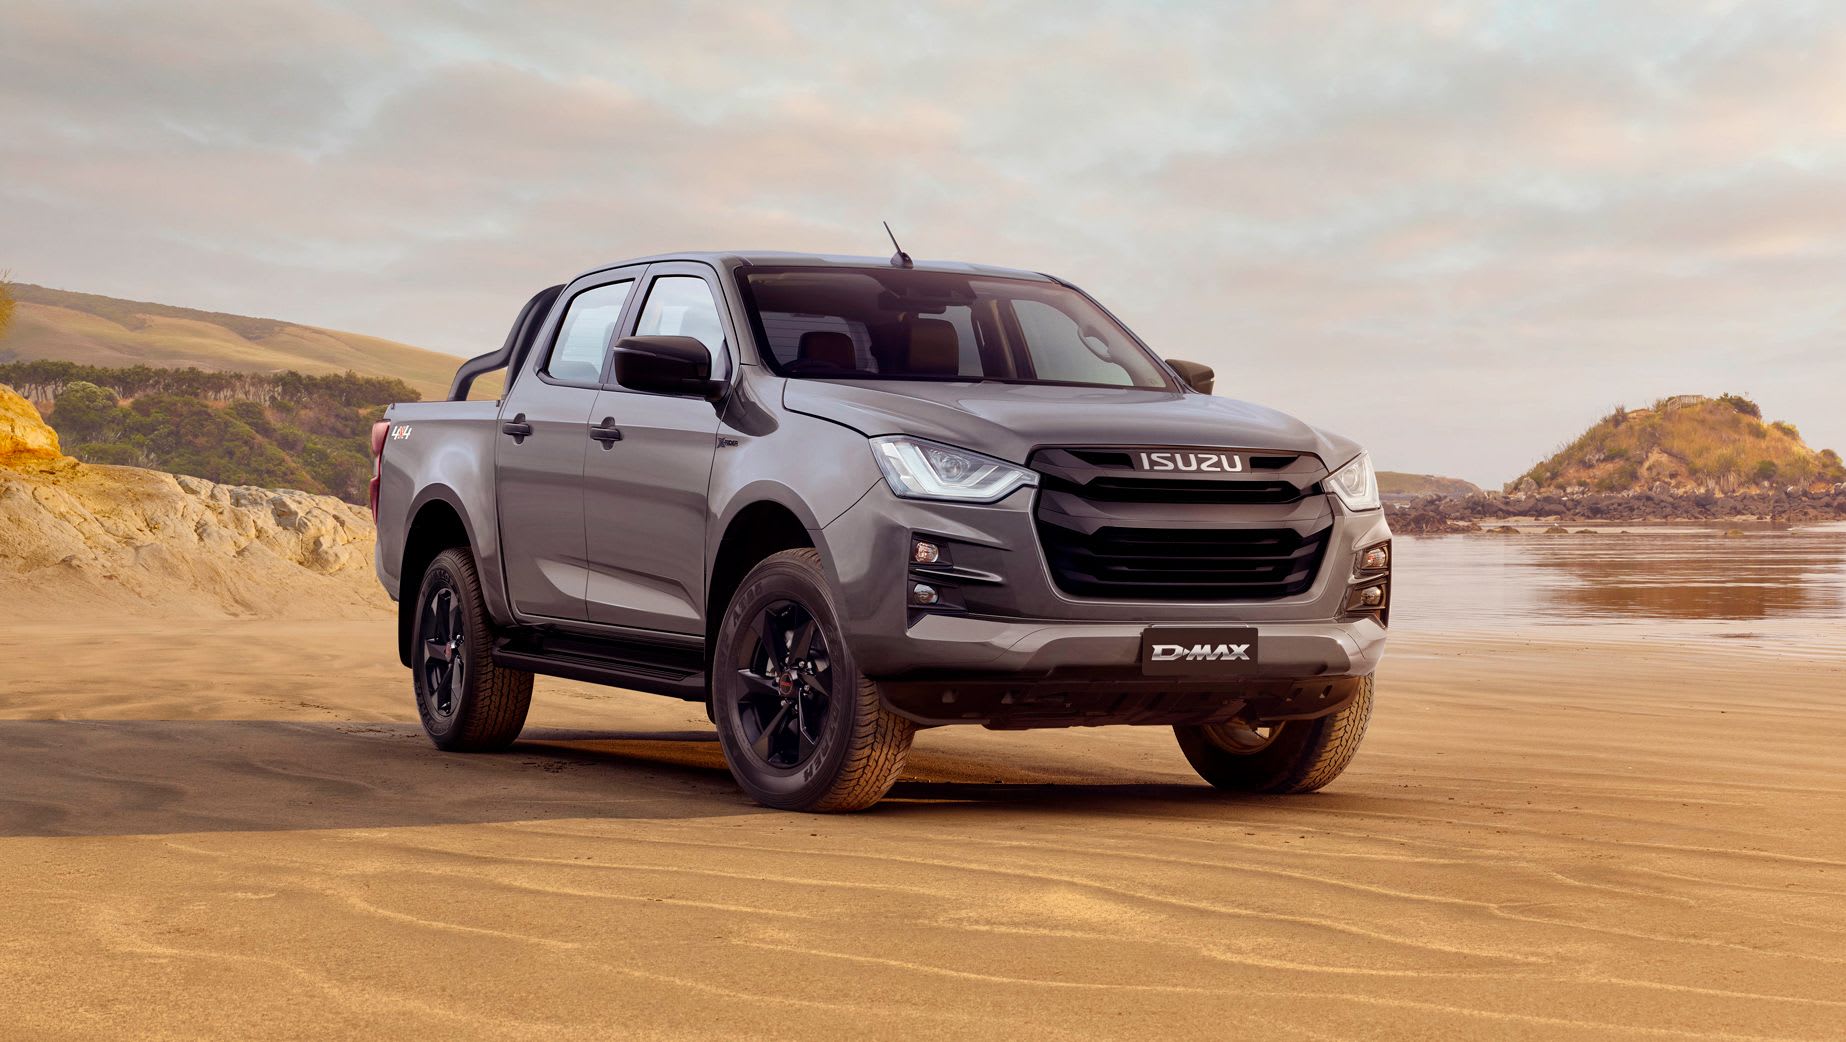 2023 Isuzu DMax XRider pricing and features Specialedition dualcab positioned to take sales